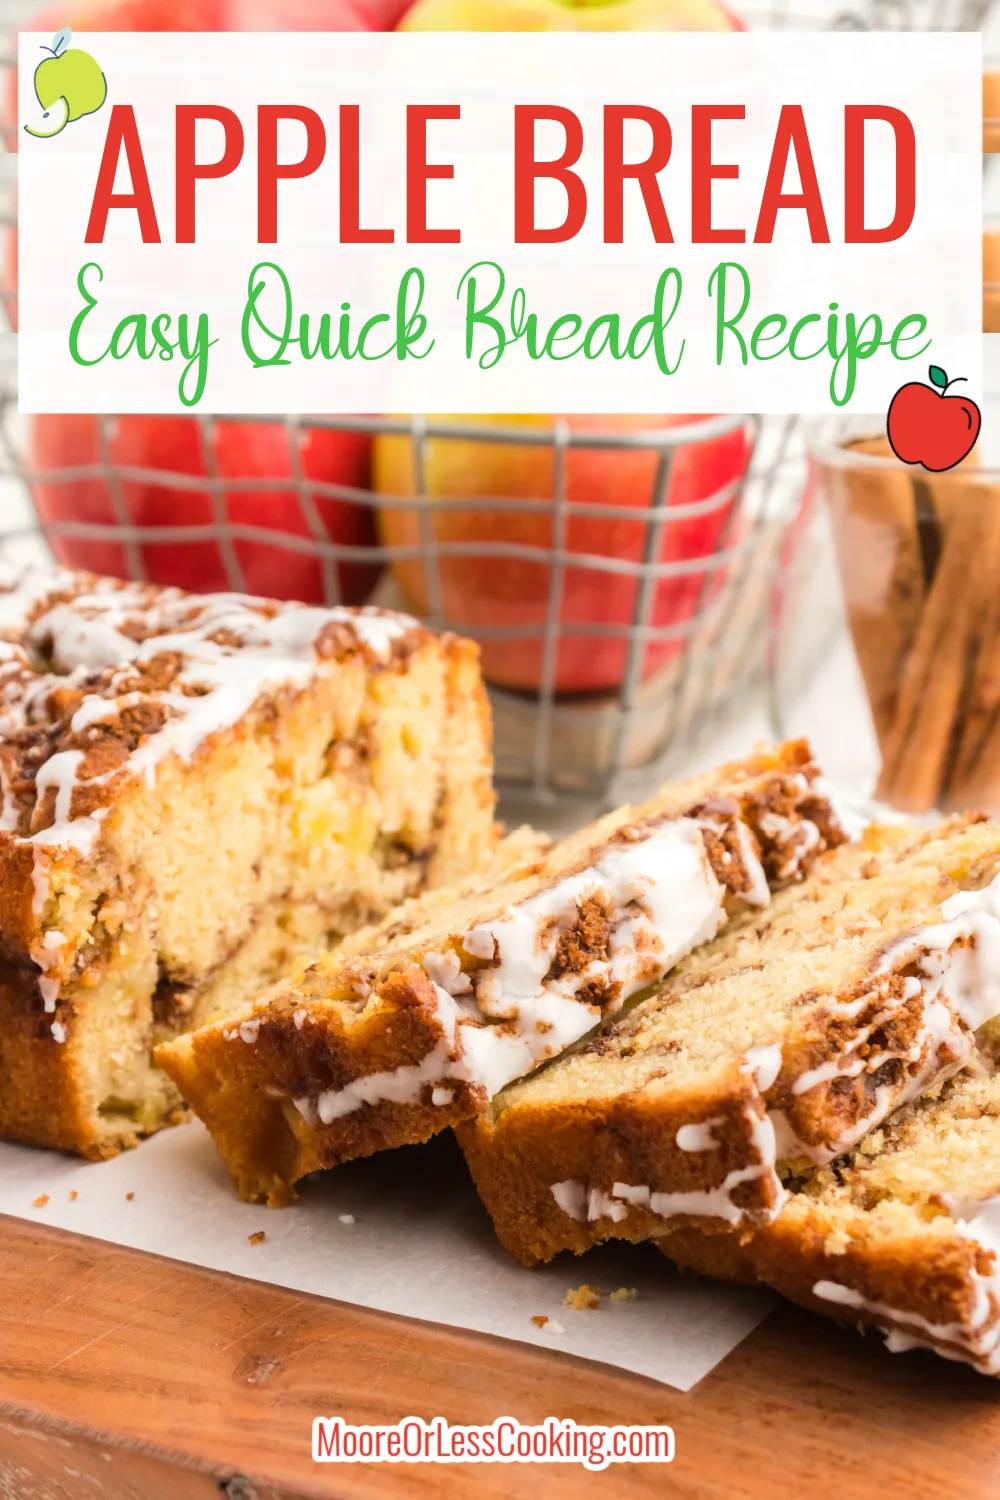 This easy quick bread recipe is full of cozy flavors and ingredients that will have your kitchen smelling like an apple orchard in autumn. Tender bites of fruity apple mingle with a cinnamon-sugar mixture within this loaf of bread that's topped with a sweet sugar glaze. A warm slice of this apple bread is an irresistible treat that's best enjoyed with a cup of coffee or a tall glass of milk. via @Mooreorlesscook